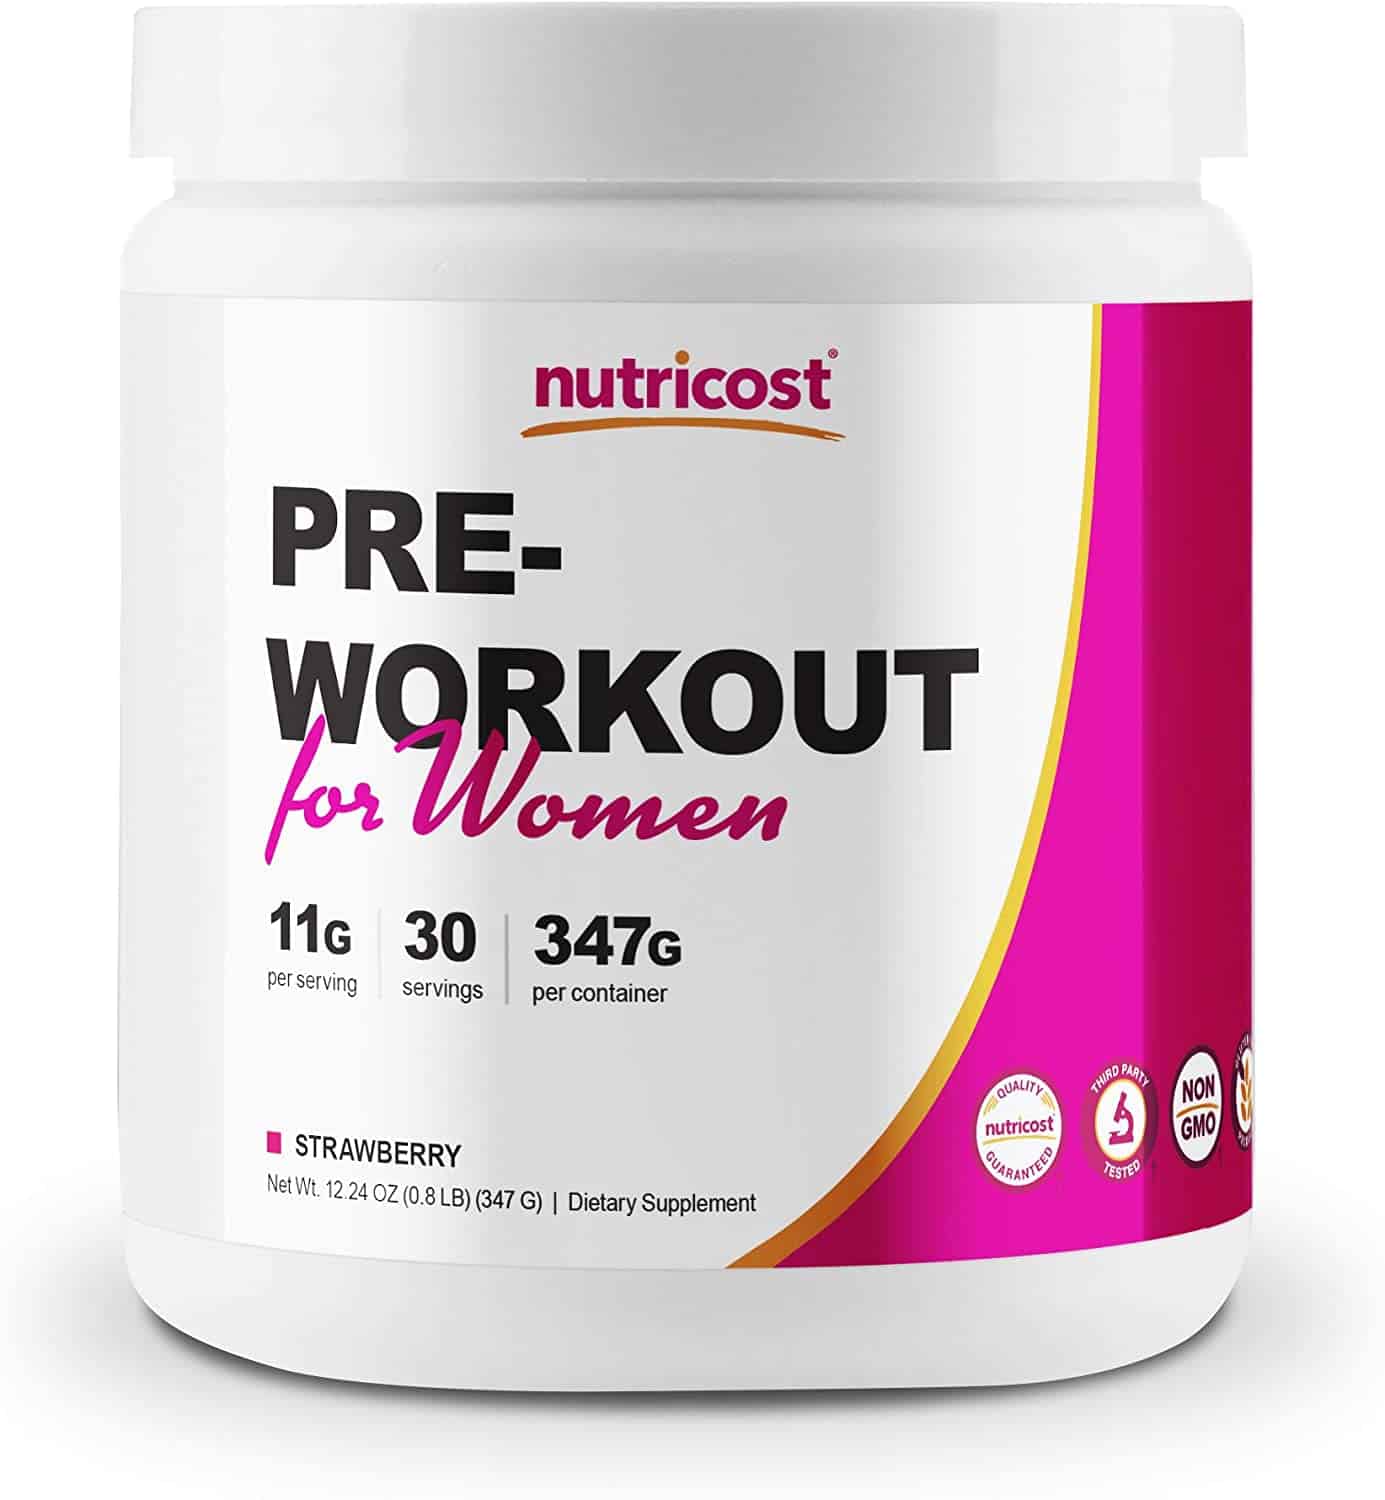 Pre workout for women ranks as one of the best pre workout supplements with Beta-Alanine